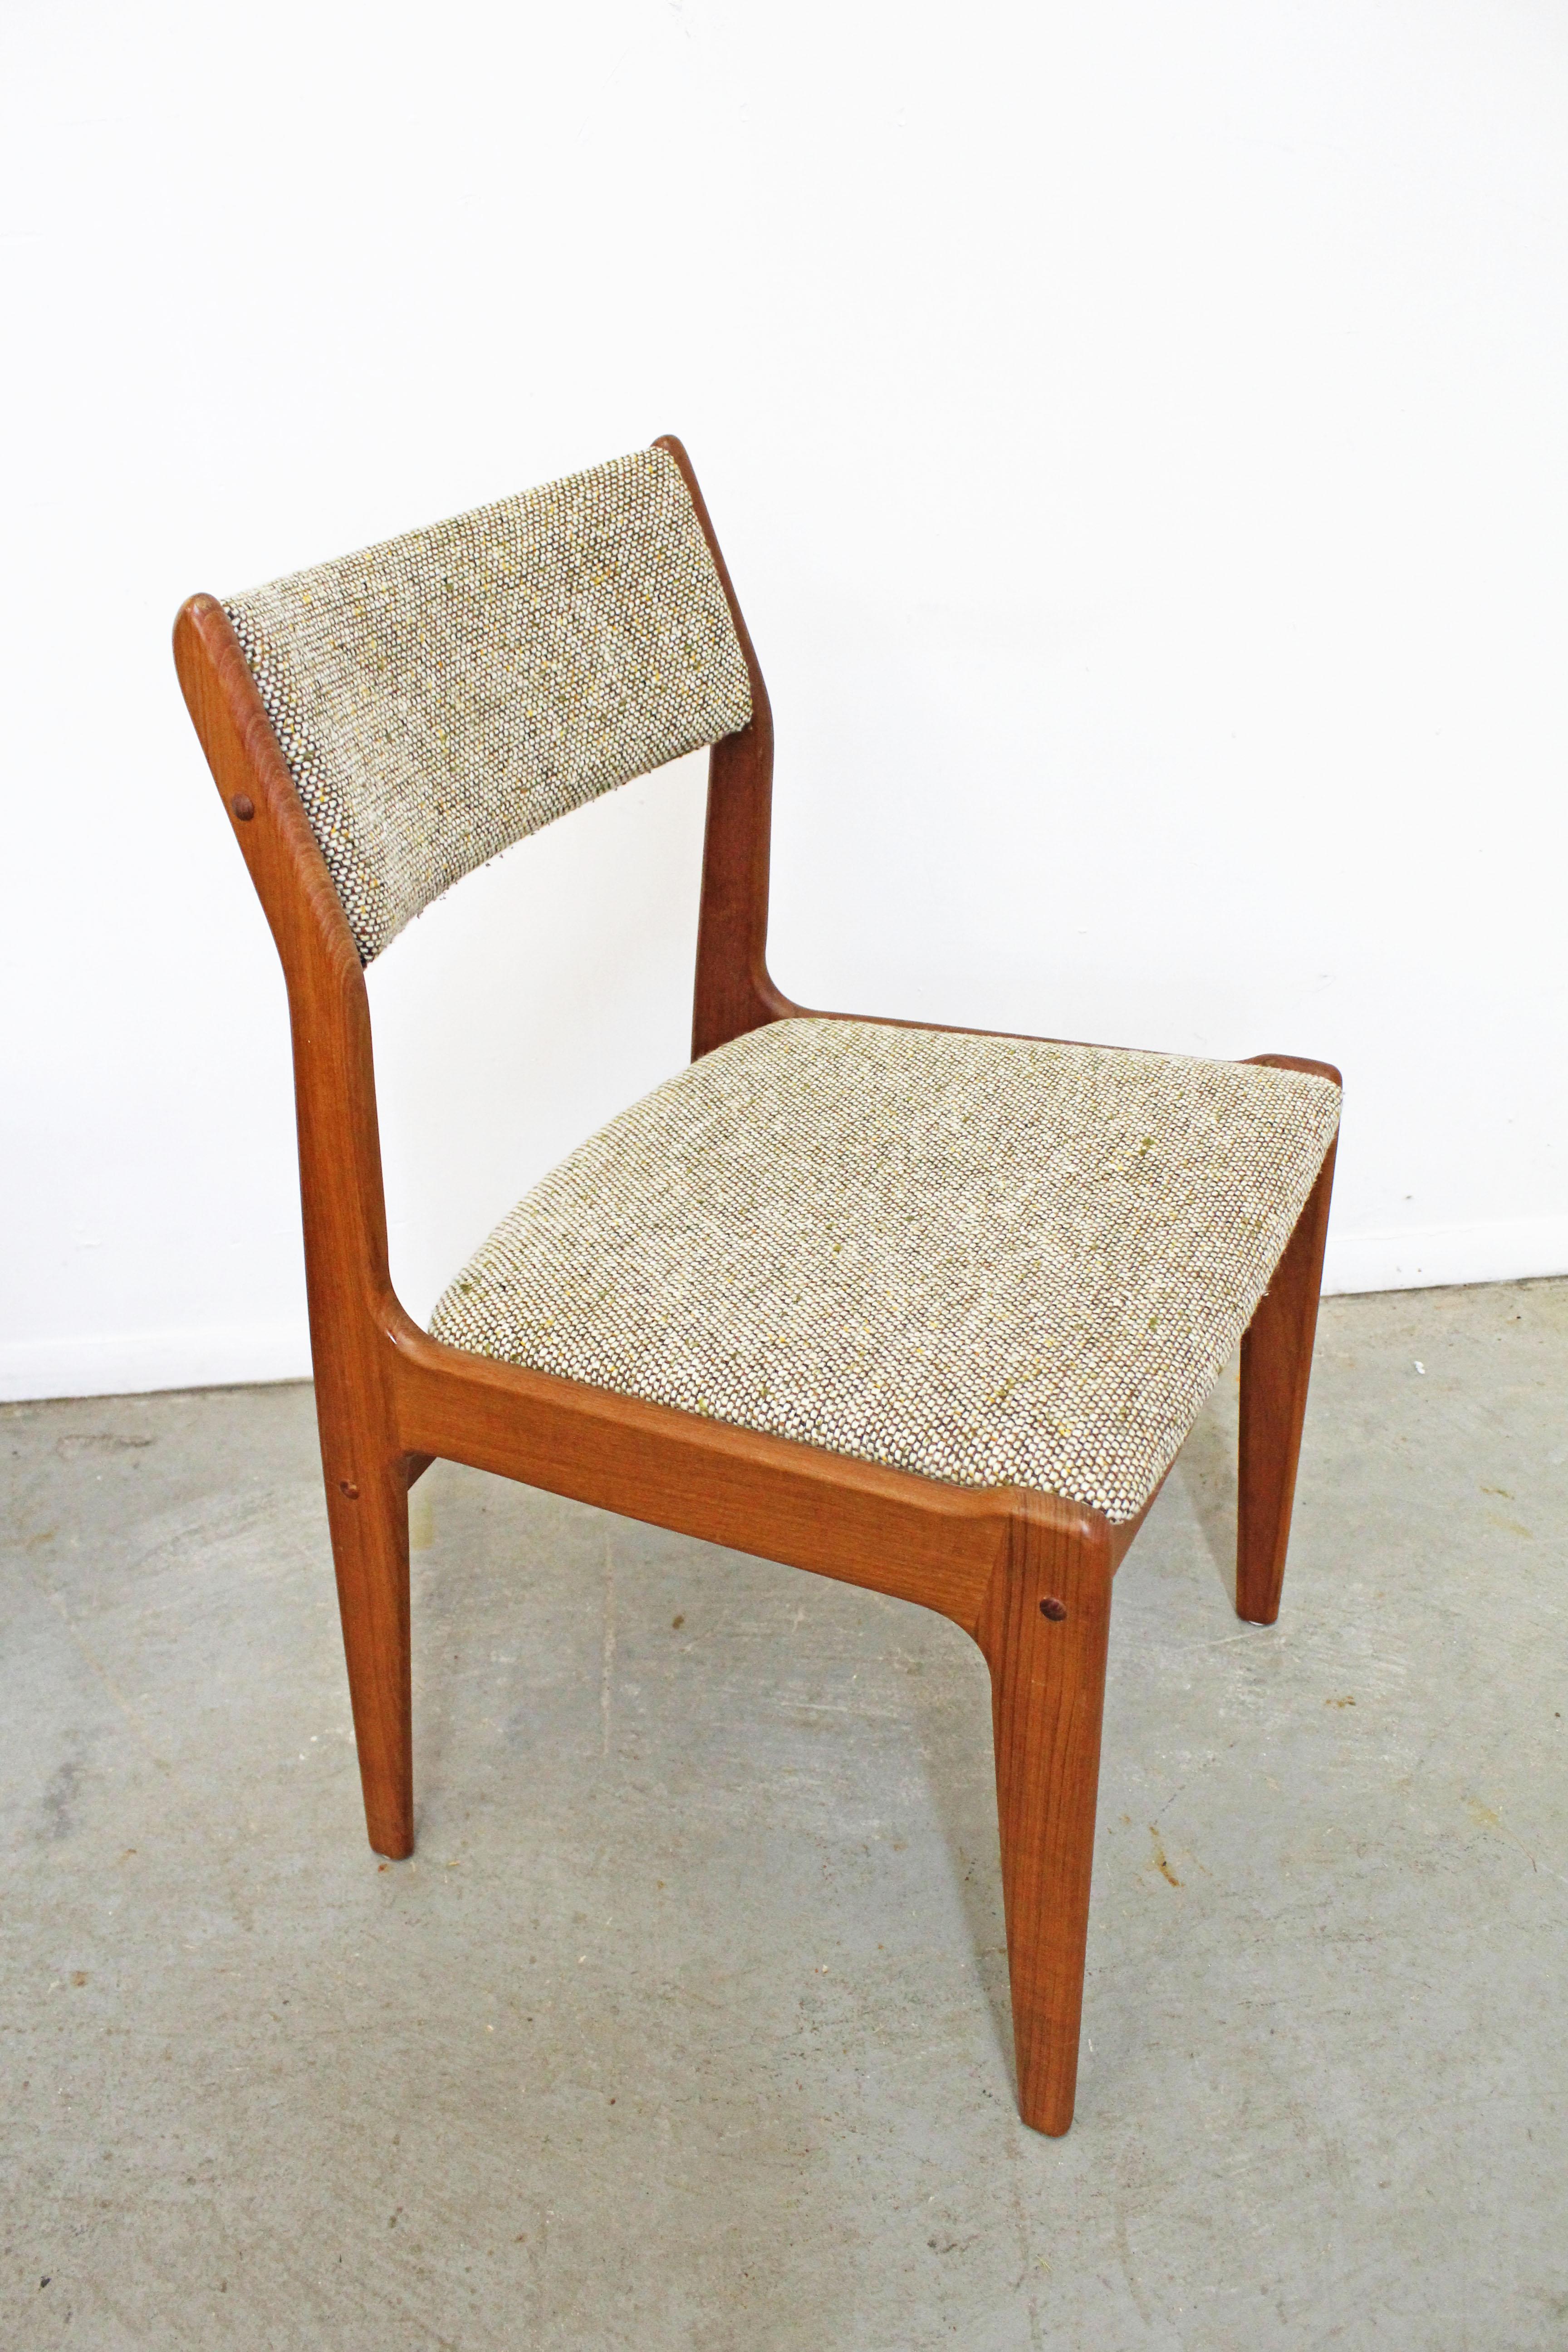 Offered is a set of 8 side/dining chairs. The set is in structurally sound condition with some age wear. They are signed by Scandinavian Woodworks. Check our other listings for more teak furniture and other Mid-Century Modern furnishings and